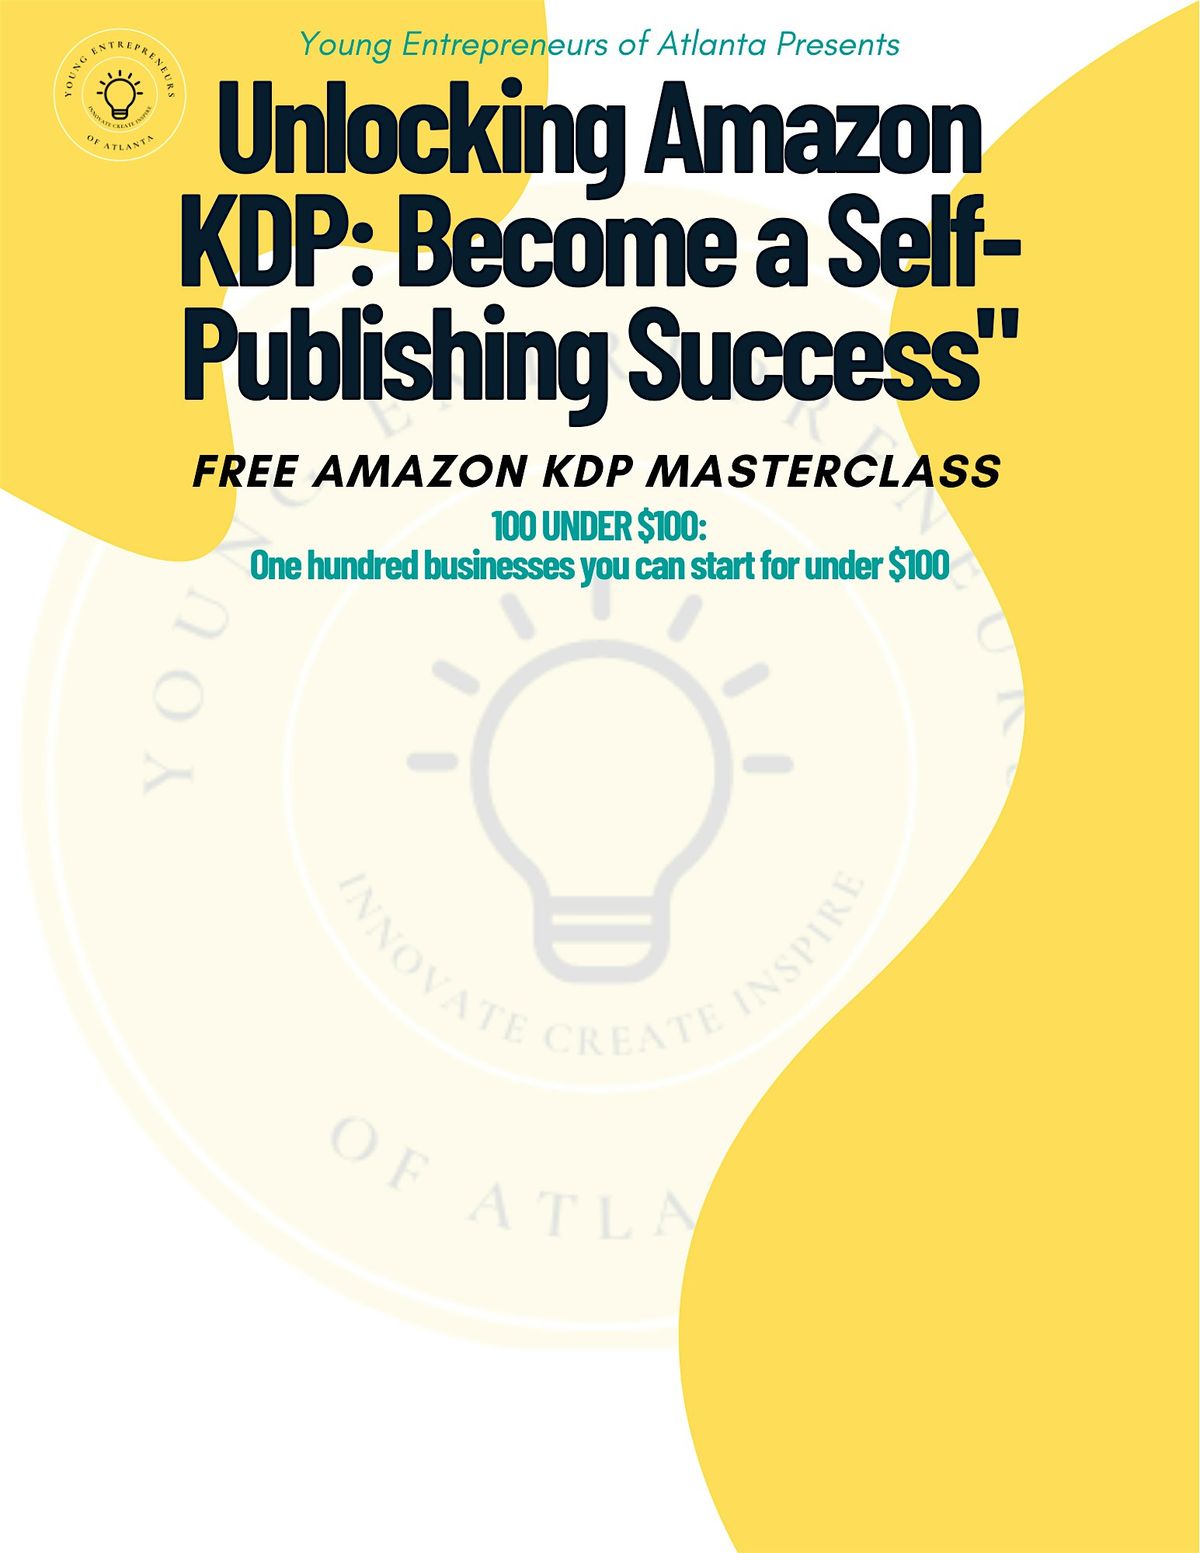 Unlocking Amazon KDP: Learn How to Self-Publish Digital Products